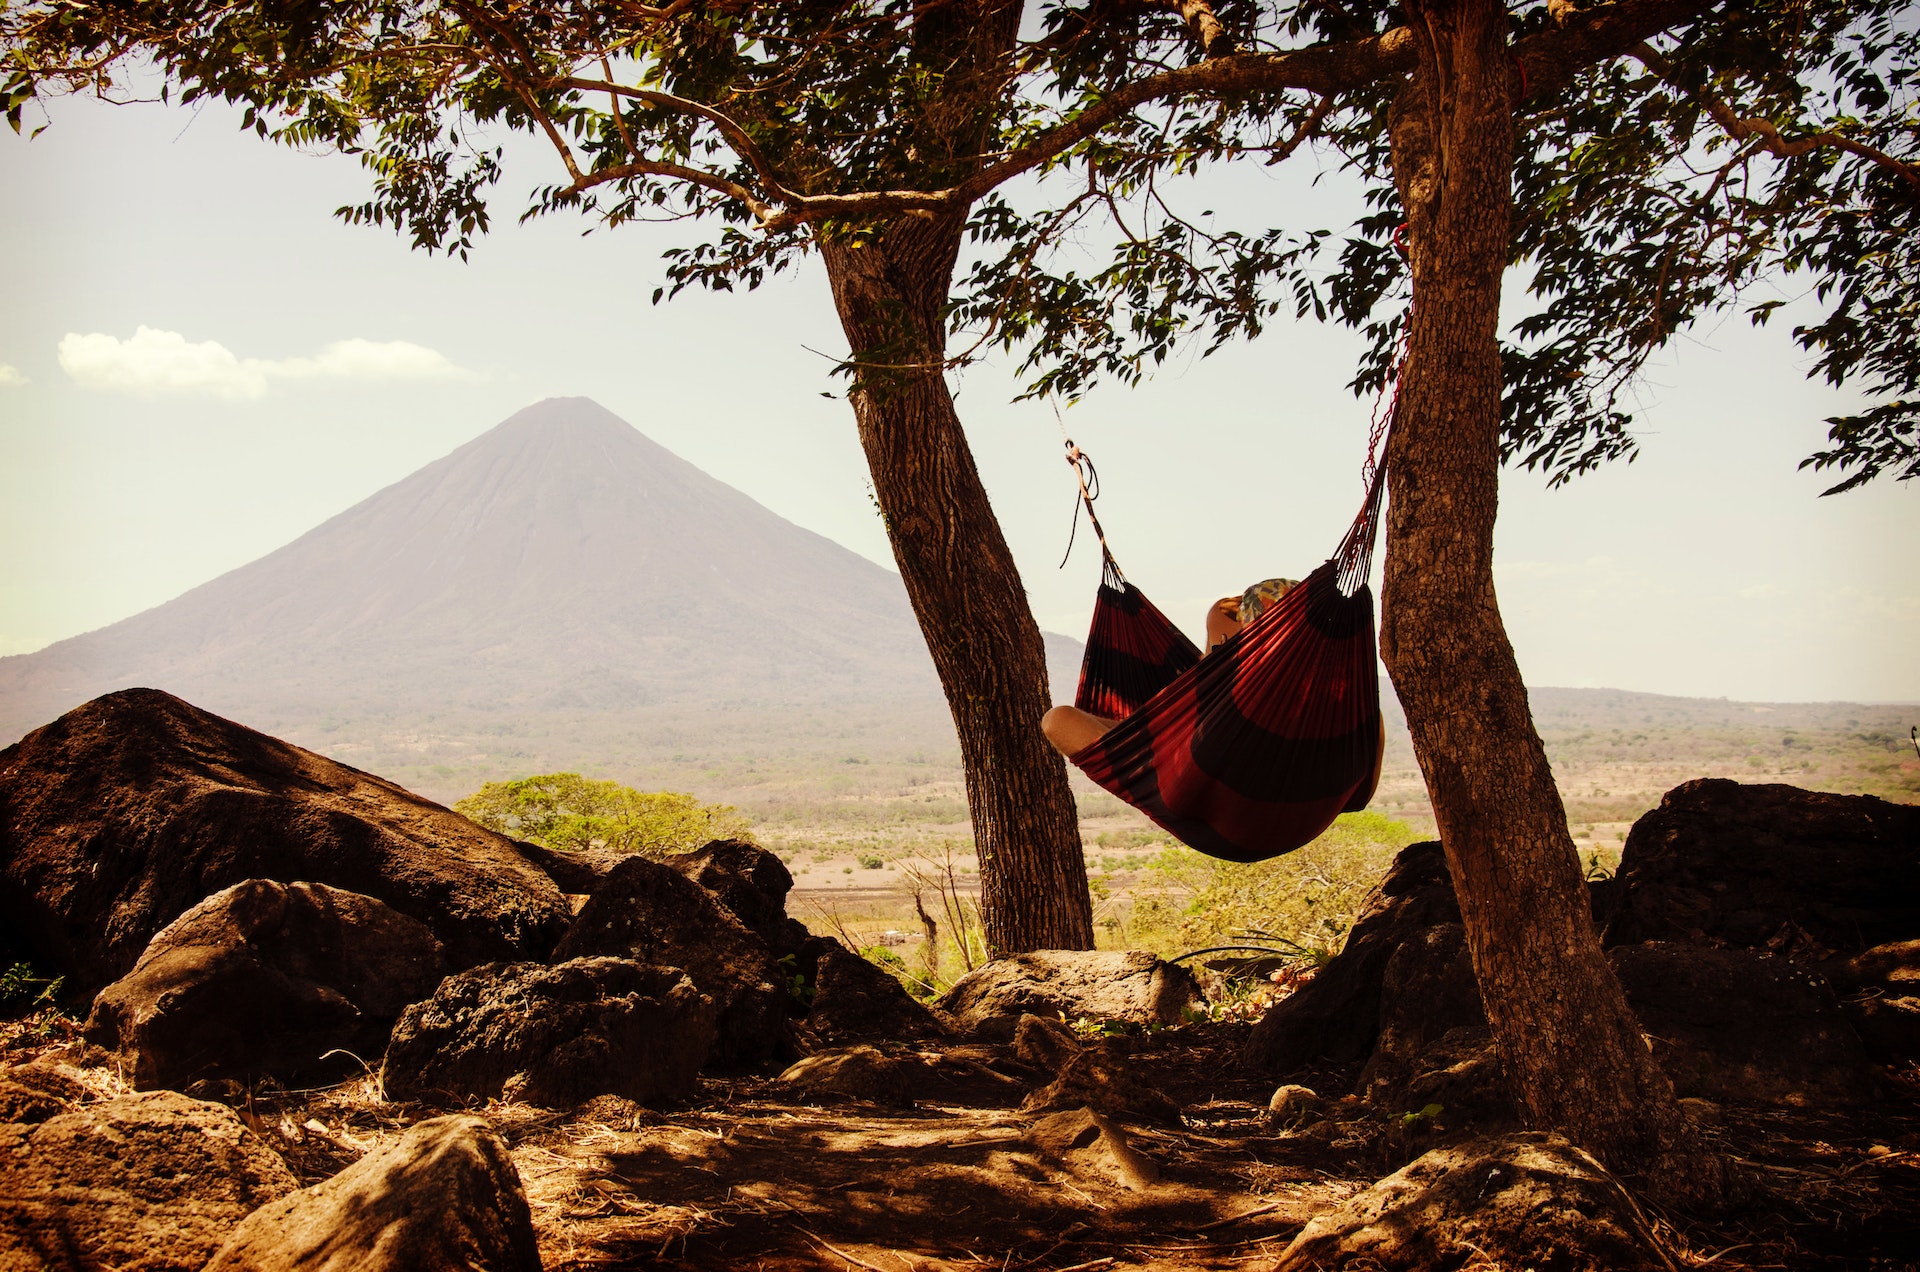 A hammock hanging between two trees with a mountain landscape in the background